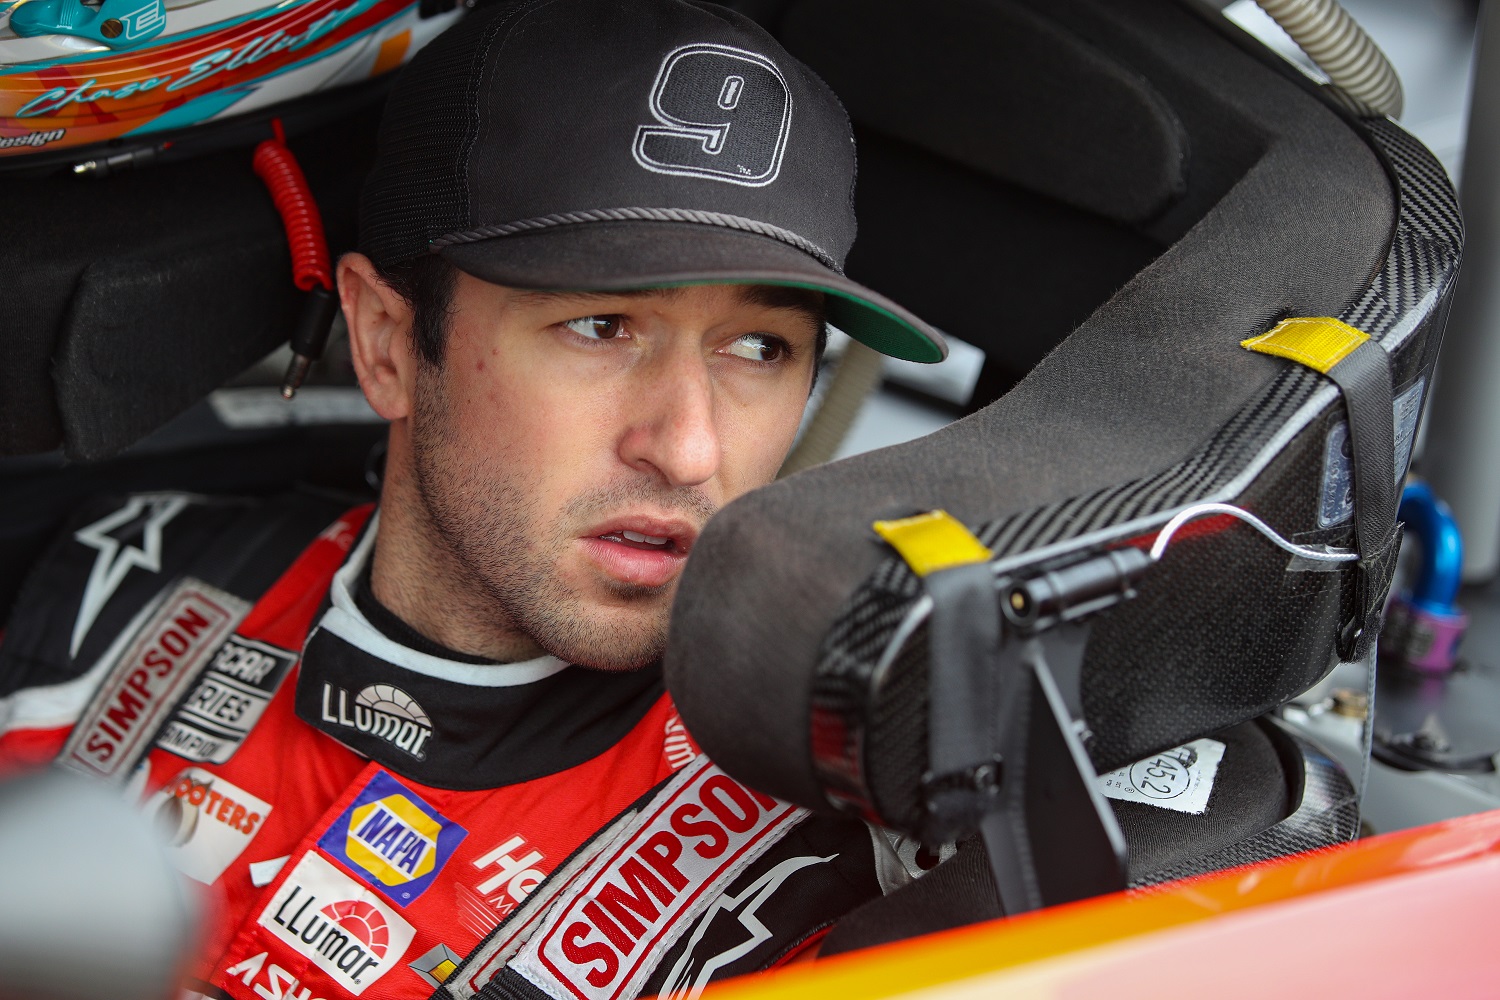 Chase Elliott sits in his car during qualifying for the NASCAR Cup Series Blue-Emu Maximum Pain Relief 400 at Martinsville Speedway on April 8, 2022. | Meg Oliphant/Getty Images